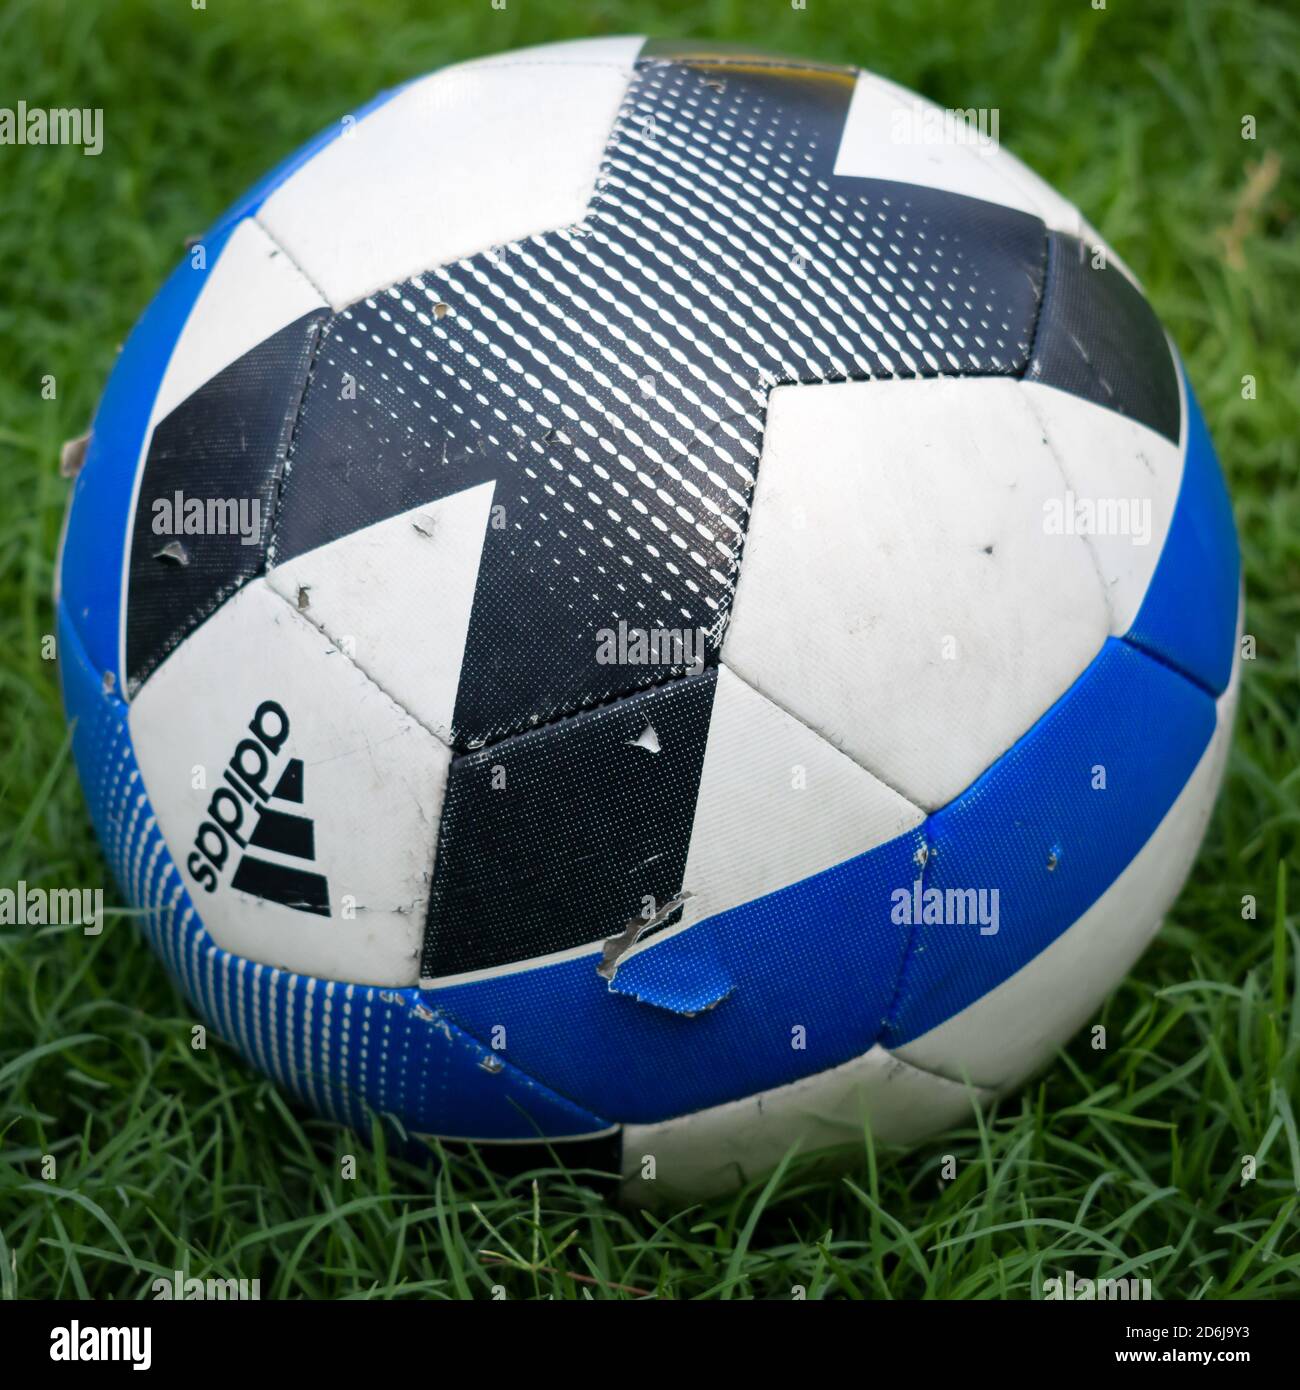 New Delhi, India - January 26 2020: A football player is holding Adidas  "Uniforia" official match ball for "UEFA Euro 2020" tournament, preparing  for Stock Photo - Alamy